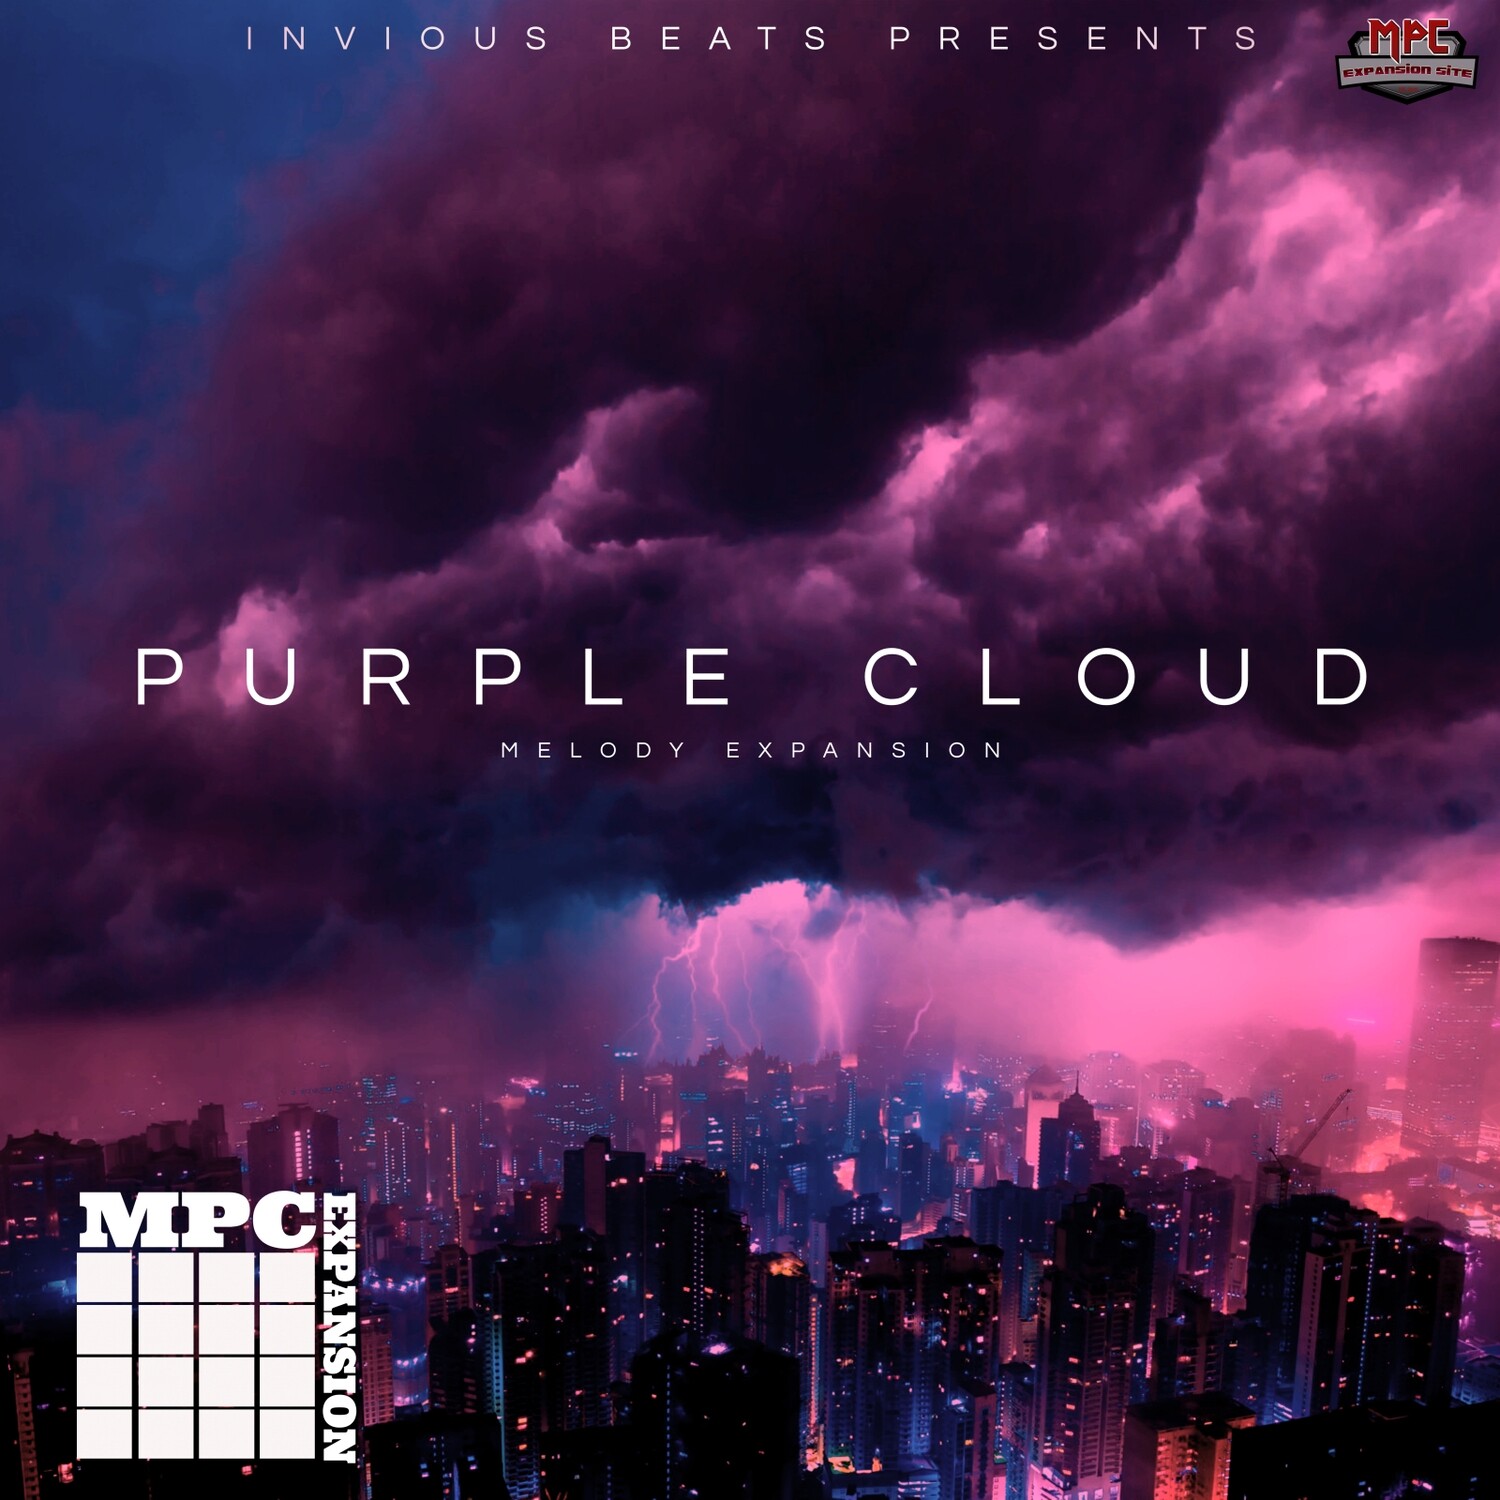 MPC EXPANSION 'PURPLE CLOUD' by INVIOUS